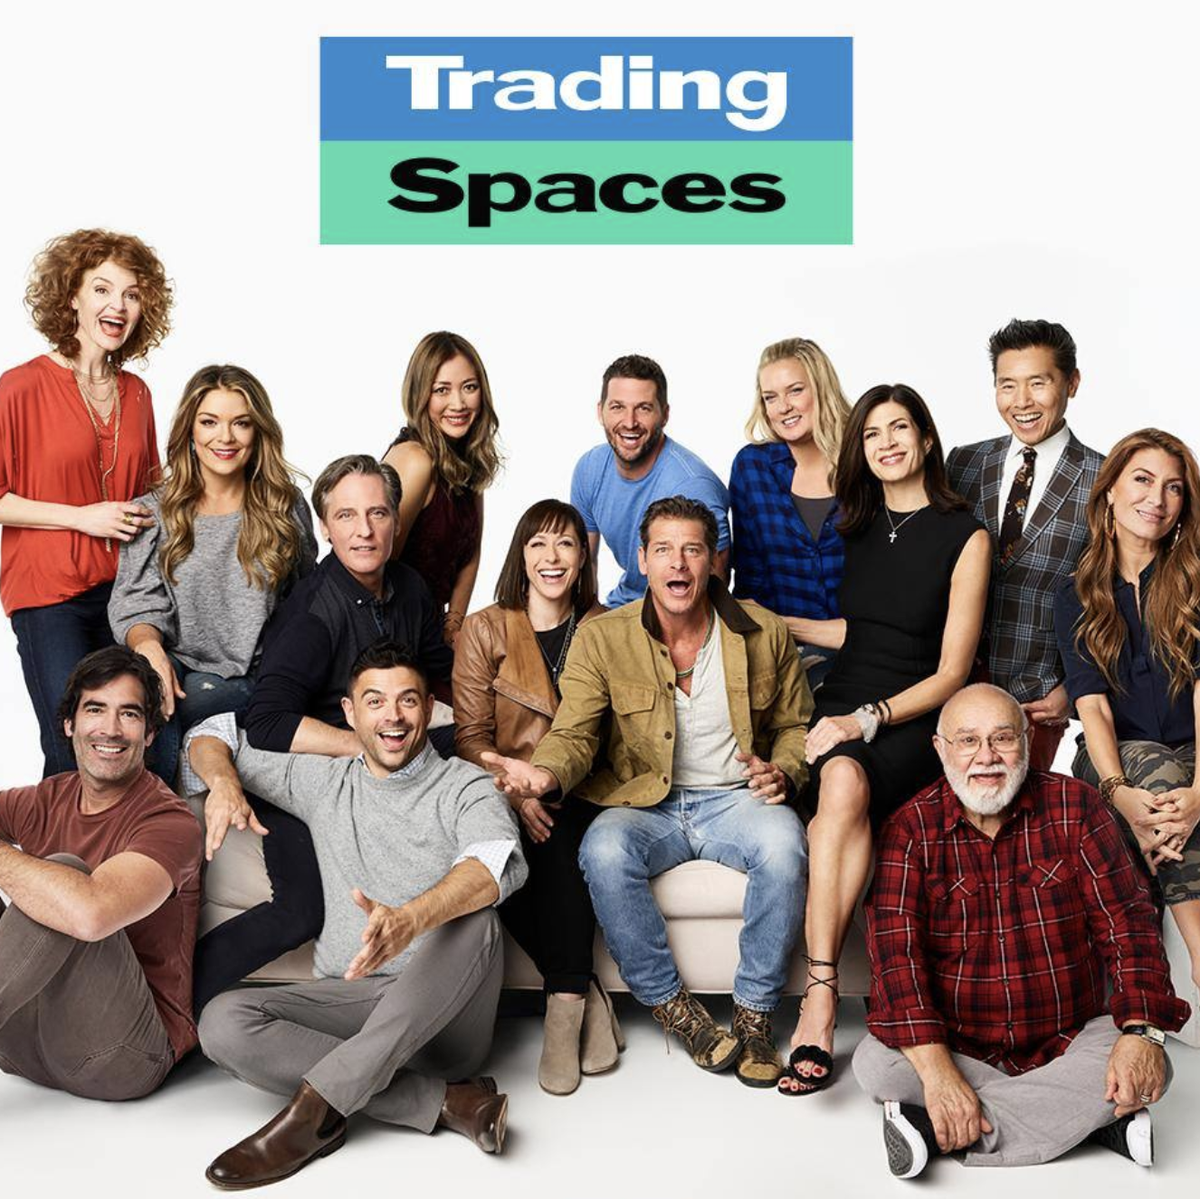 Trading spaces